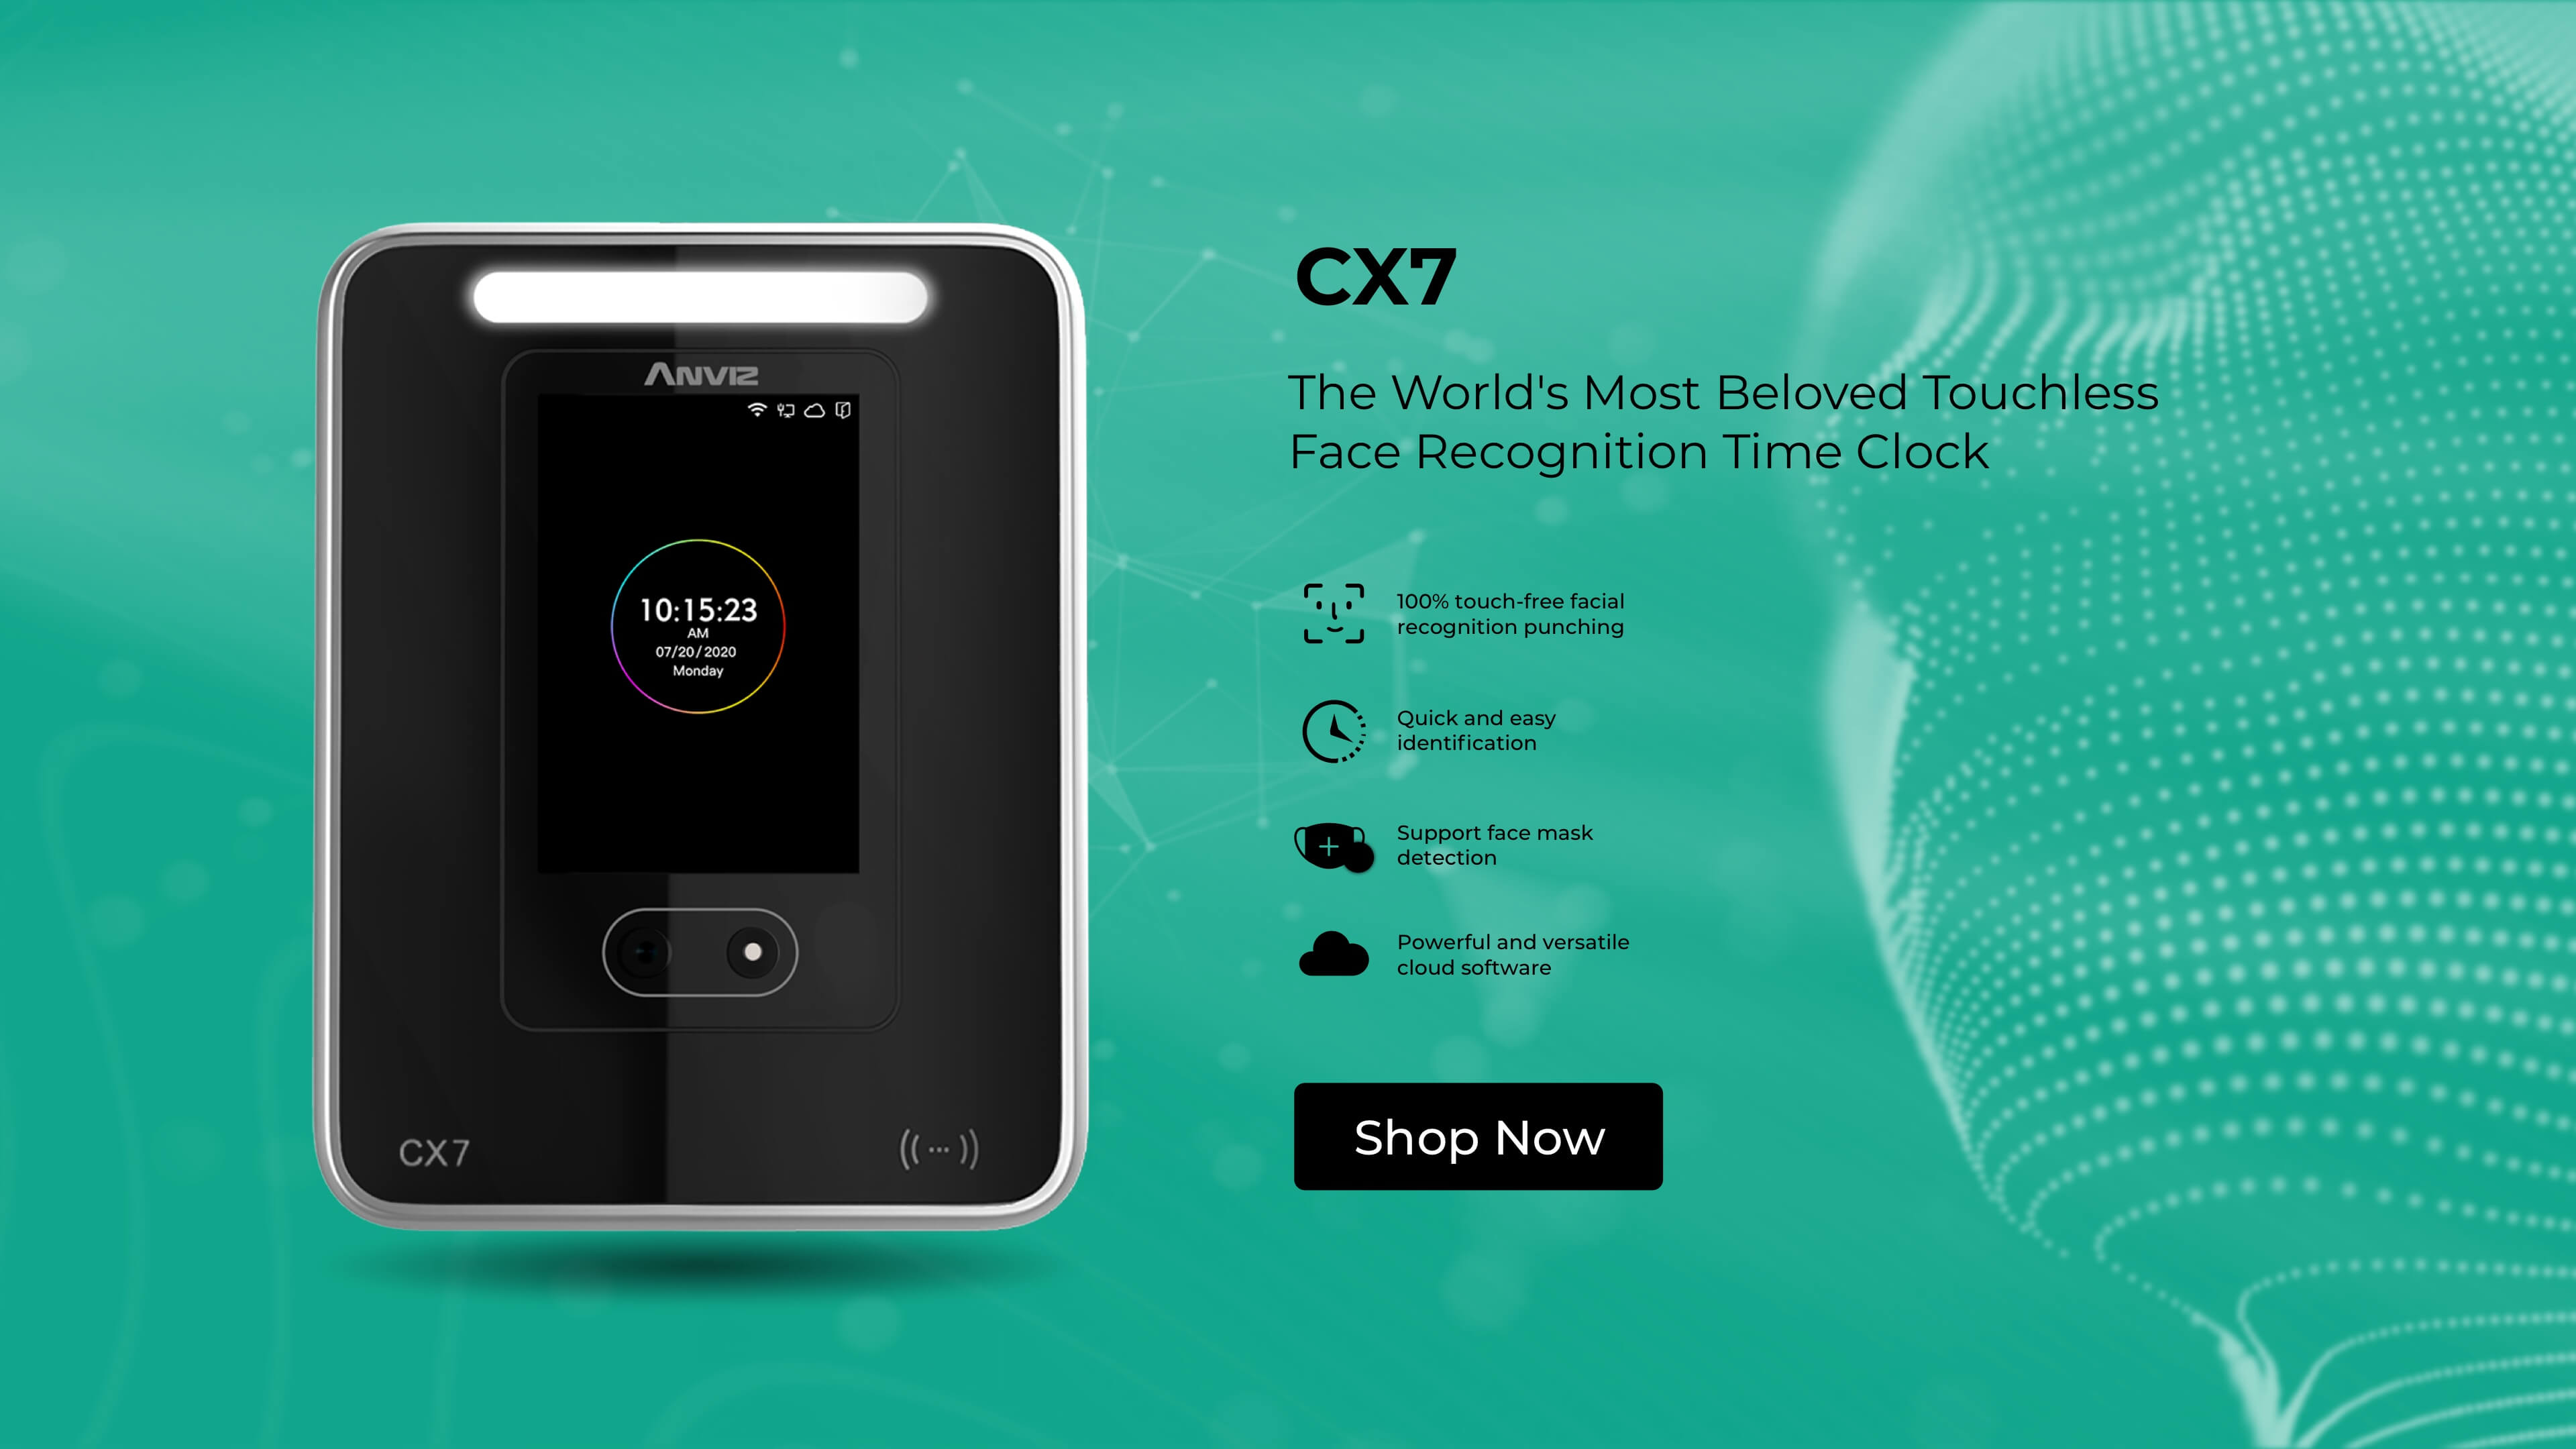 CX7 Best Cloud-based Face Recognition Time Clocks for Empoyers